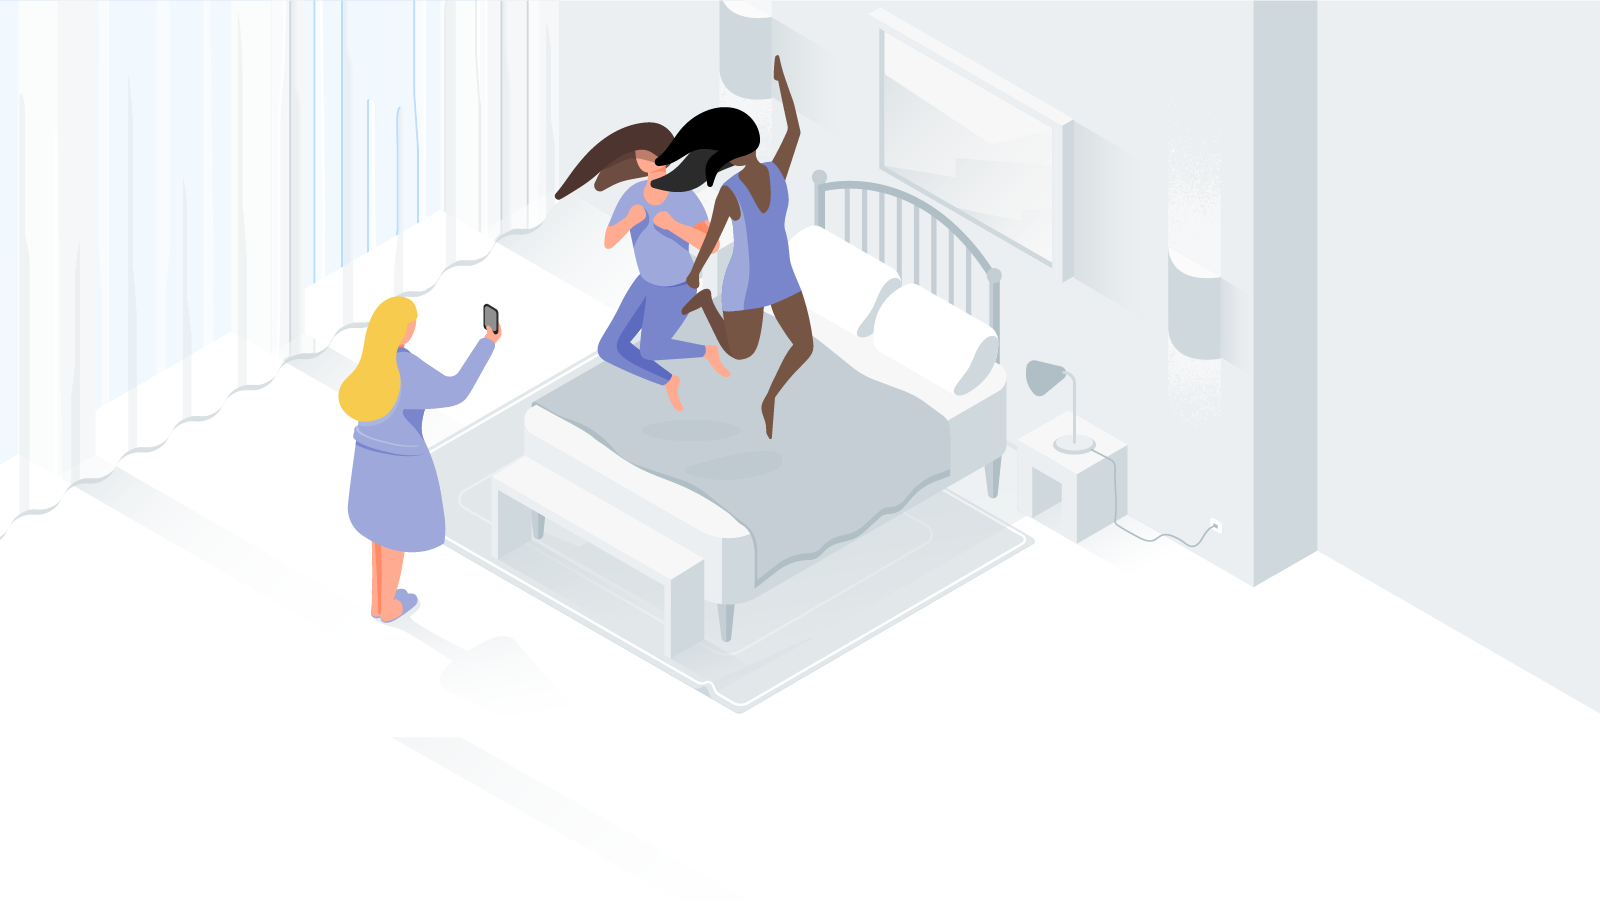 Illustrations for Google Hotel Reviews